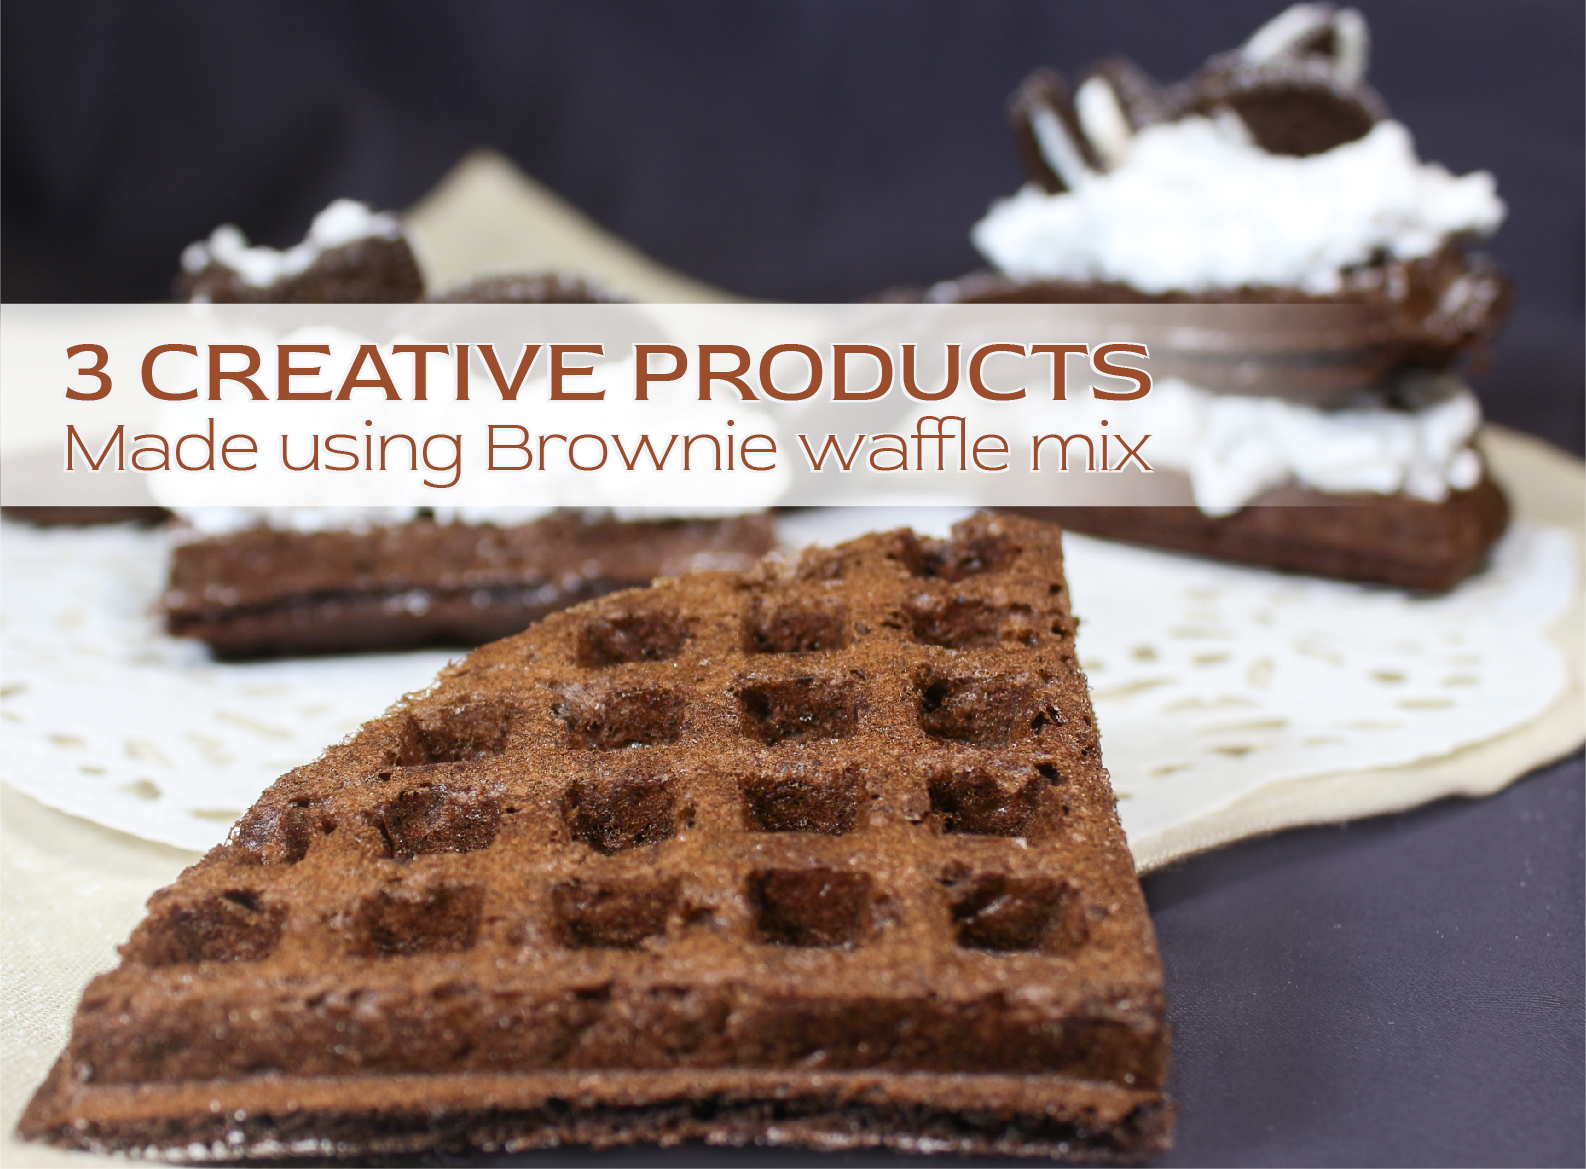 3 Creative products made using Brownie waffle mix